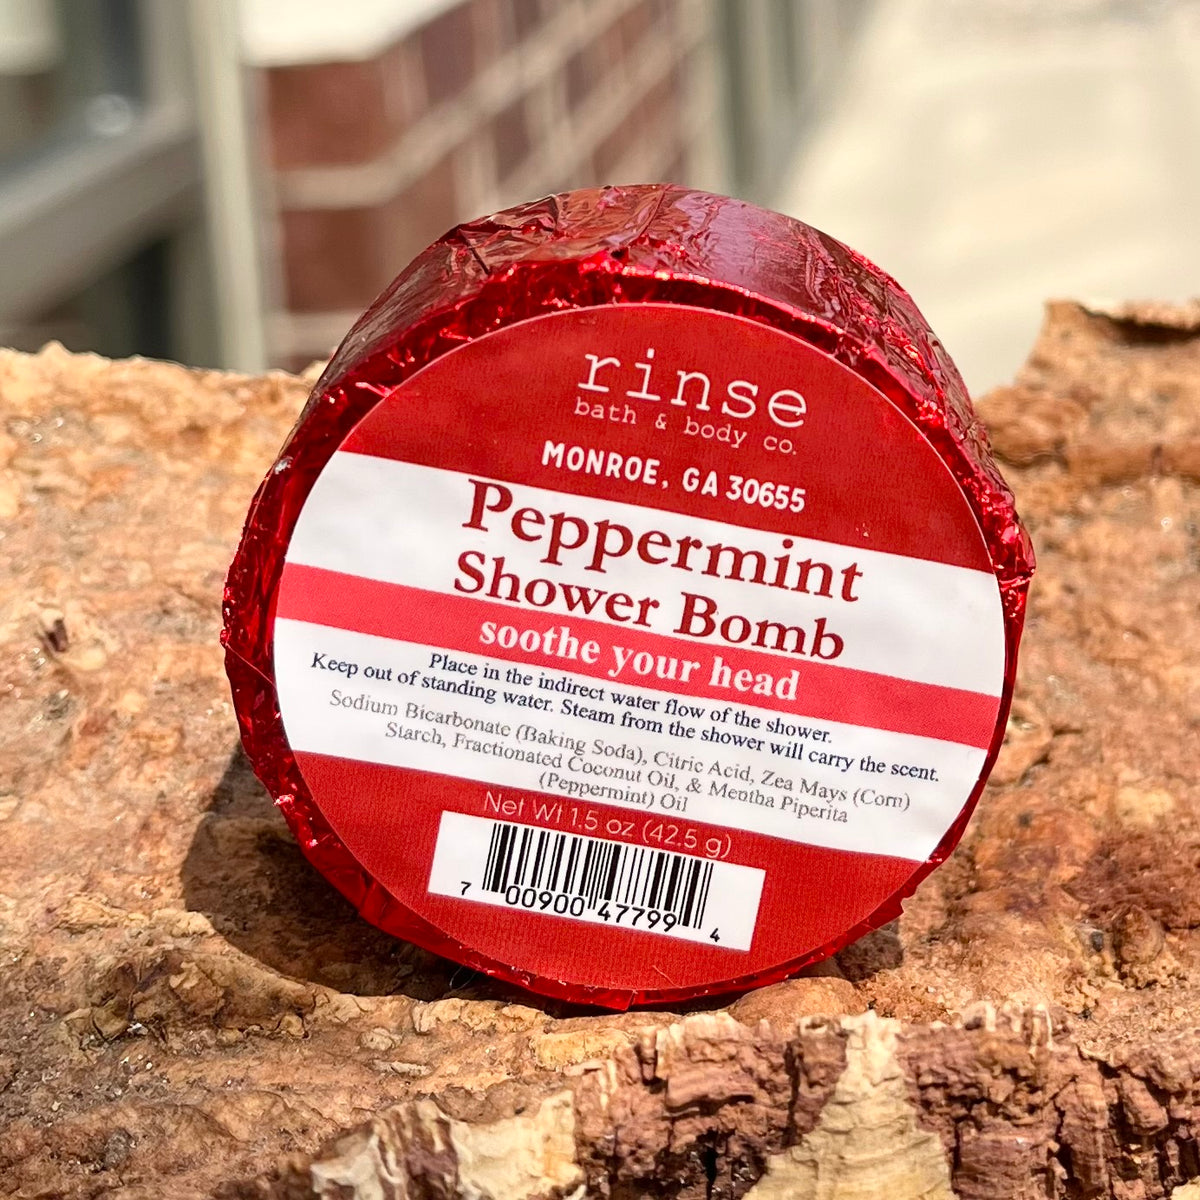 Peppermint shower bomb in shing red wrapper